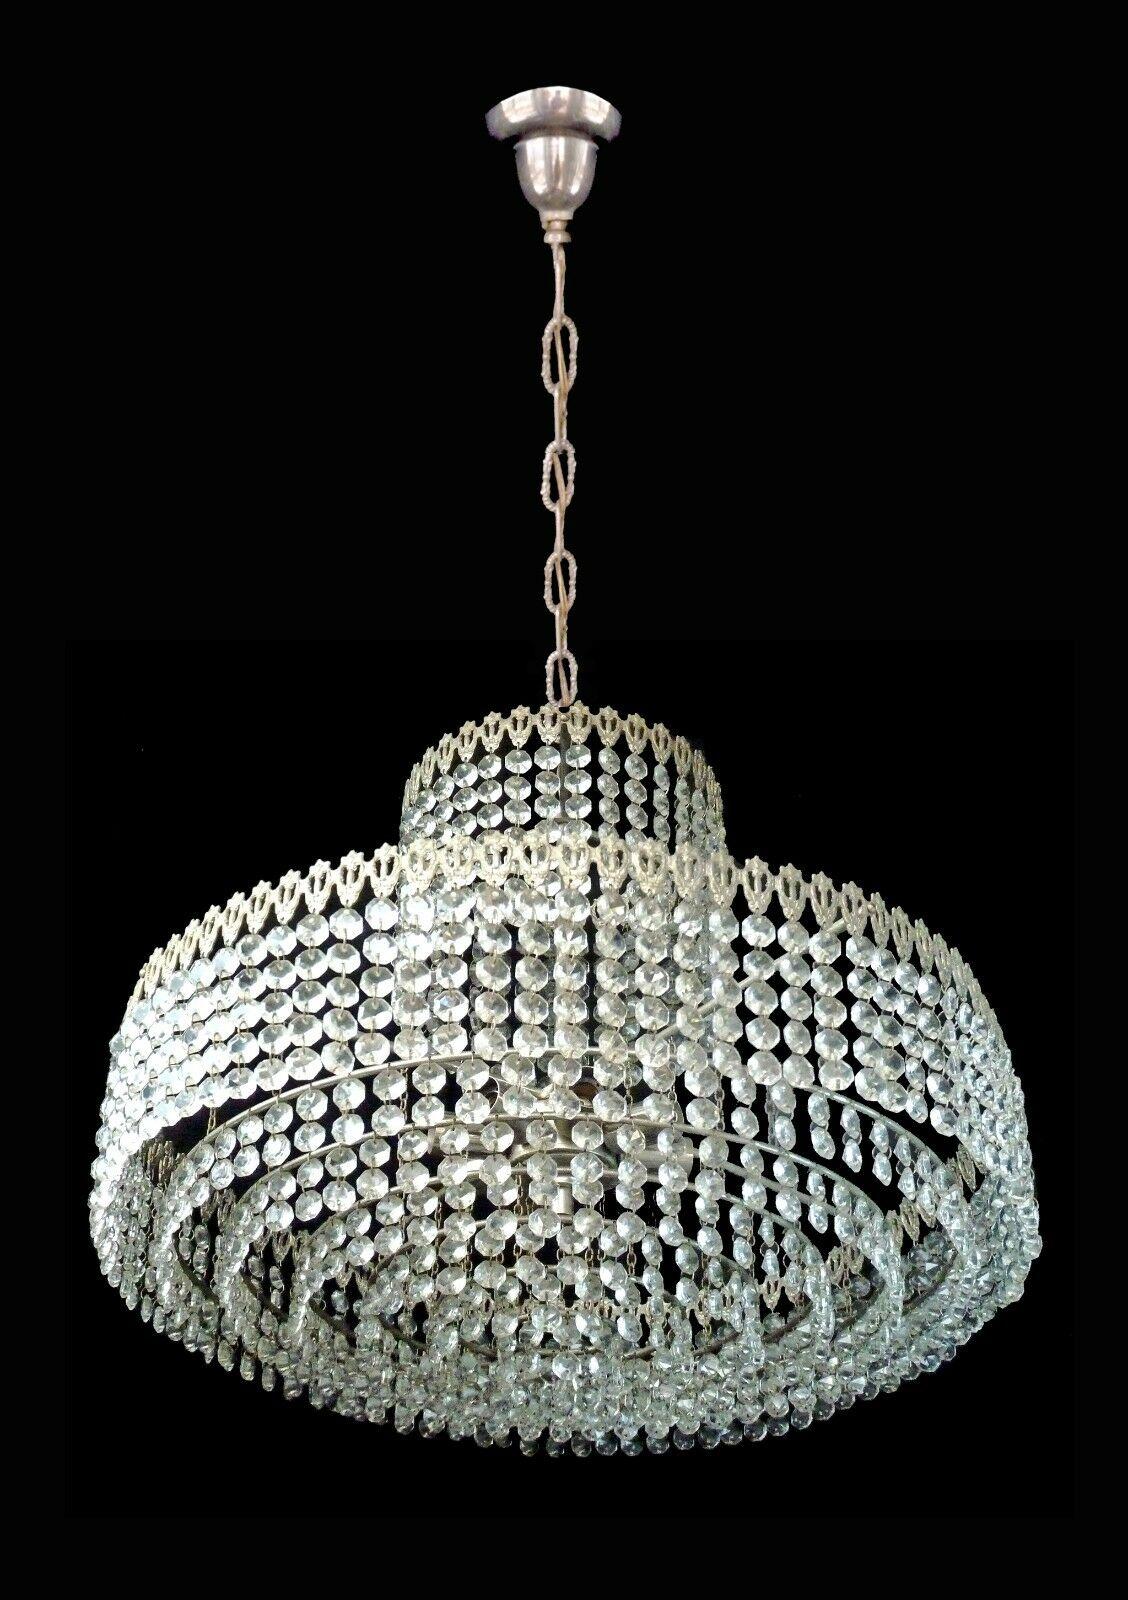 French Hollywood Regency Chrome Cut Crystal Beads 8tiers Wedding Cake Chandelier For Sale 1